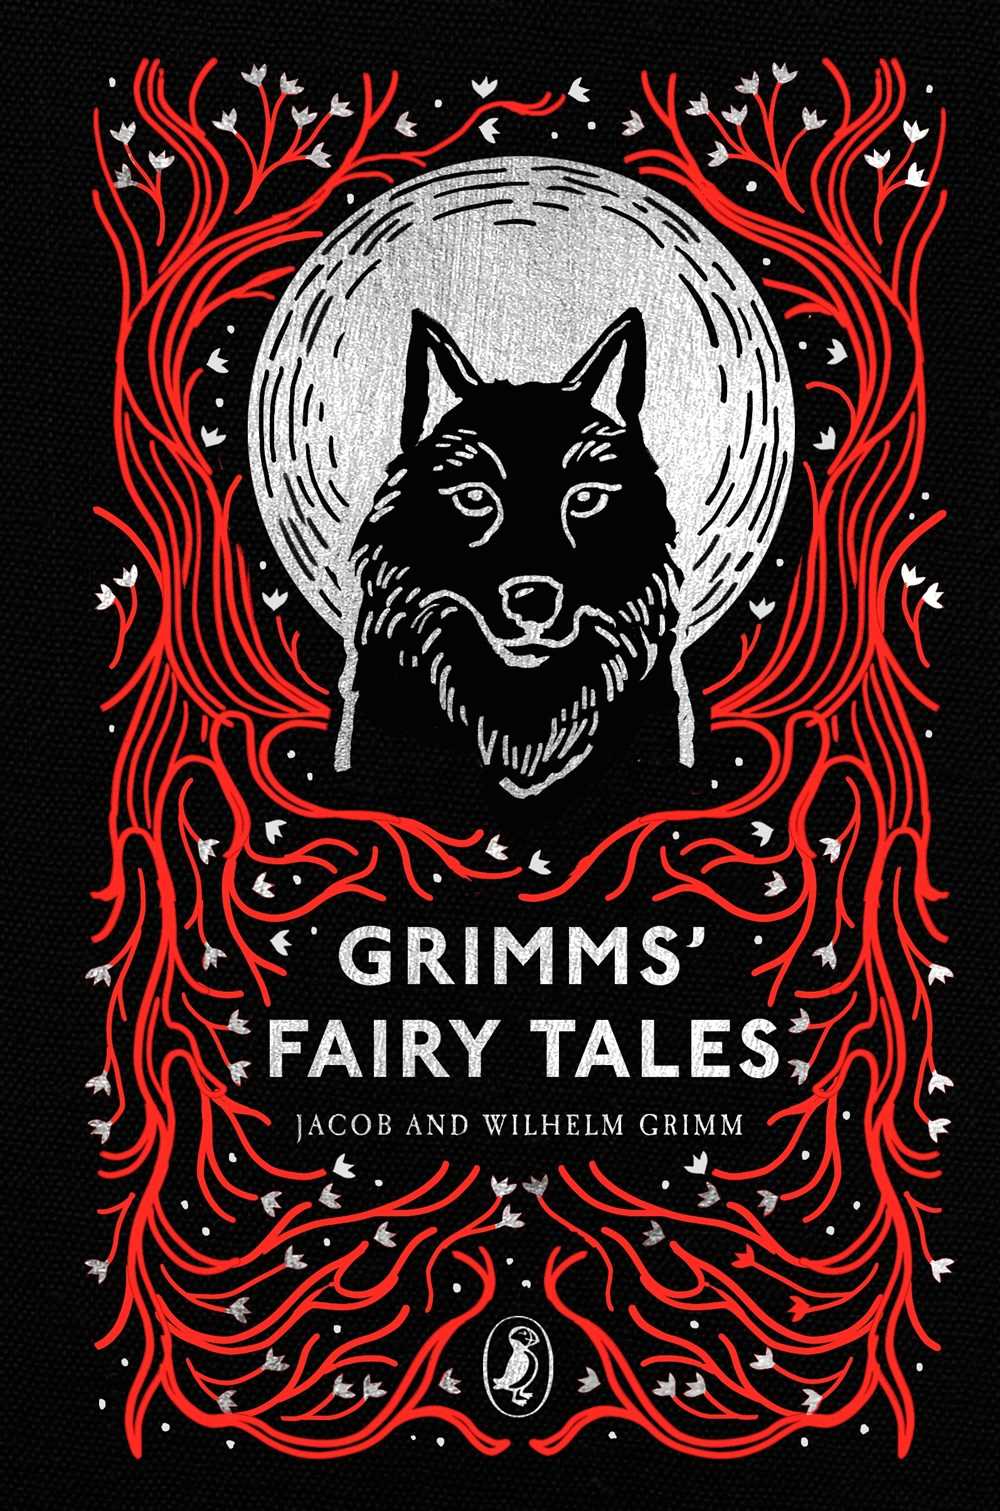 Grimms' Fairy Tales (Puffin Clothbound Classics)